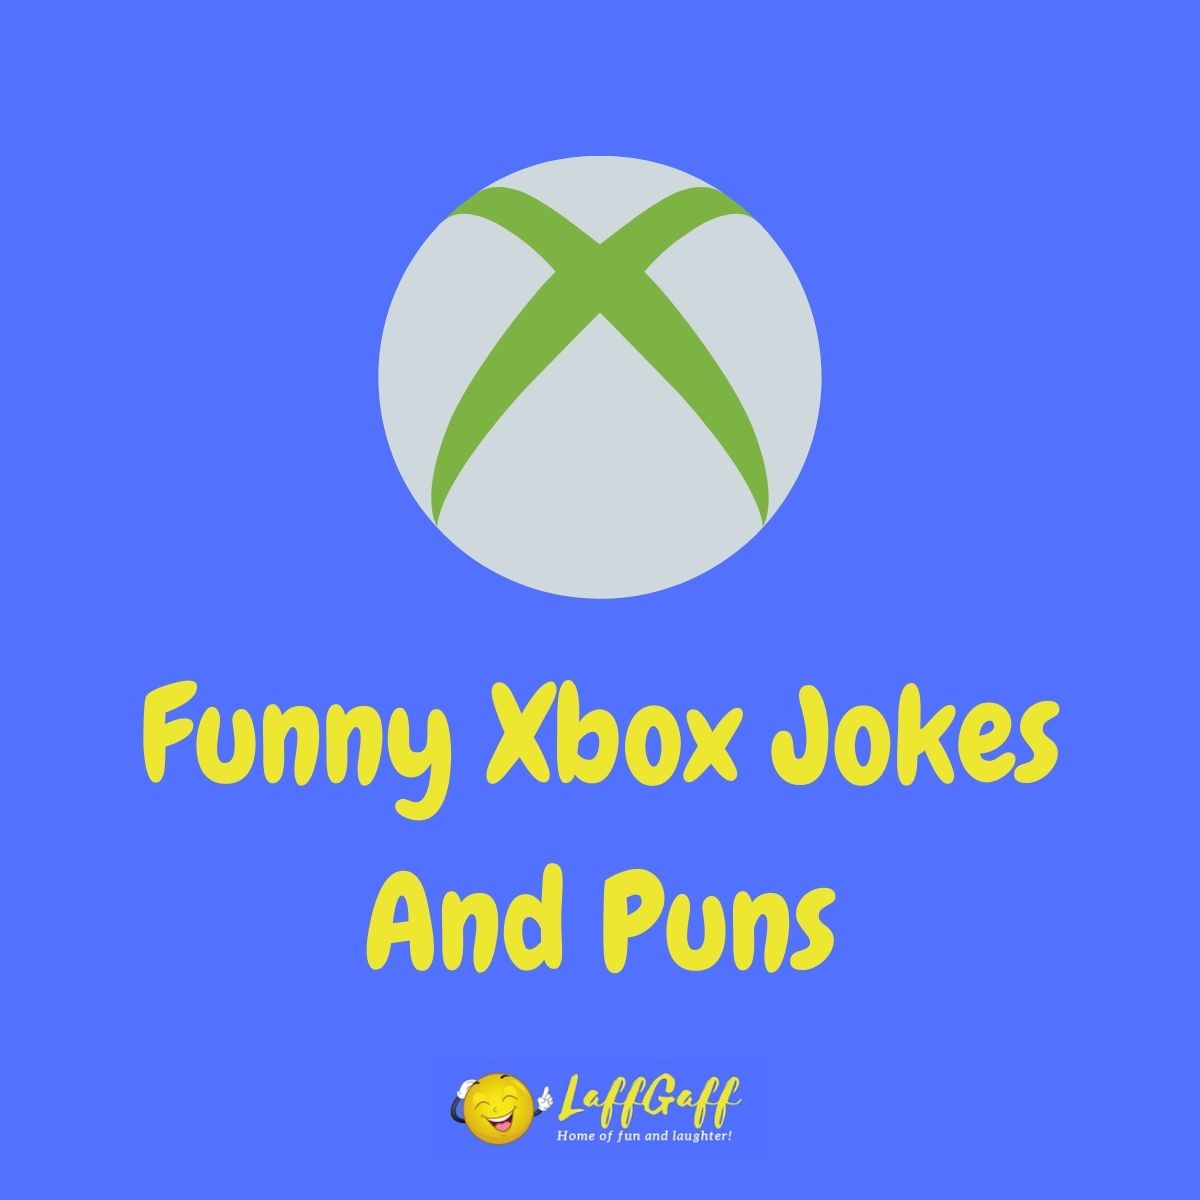 Featured image for a page of funny Xbox jokes and puns.